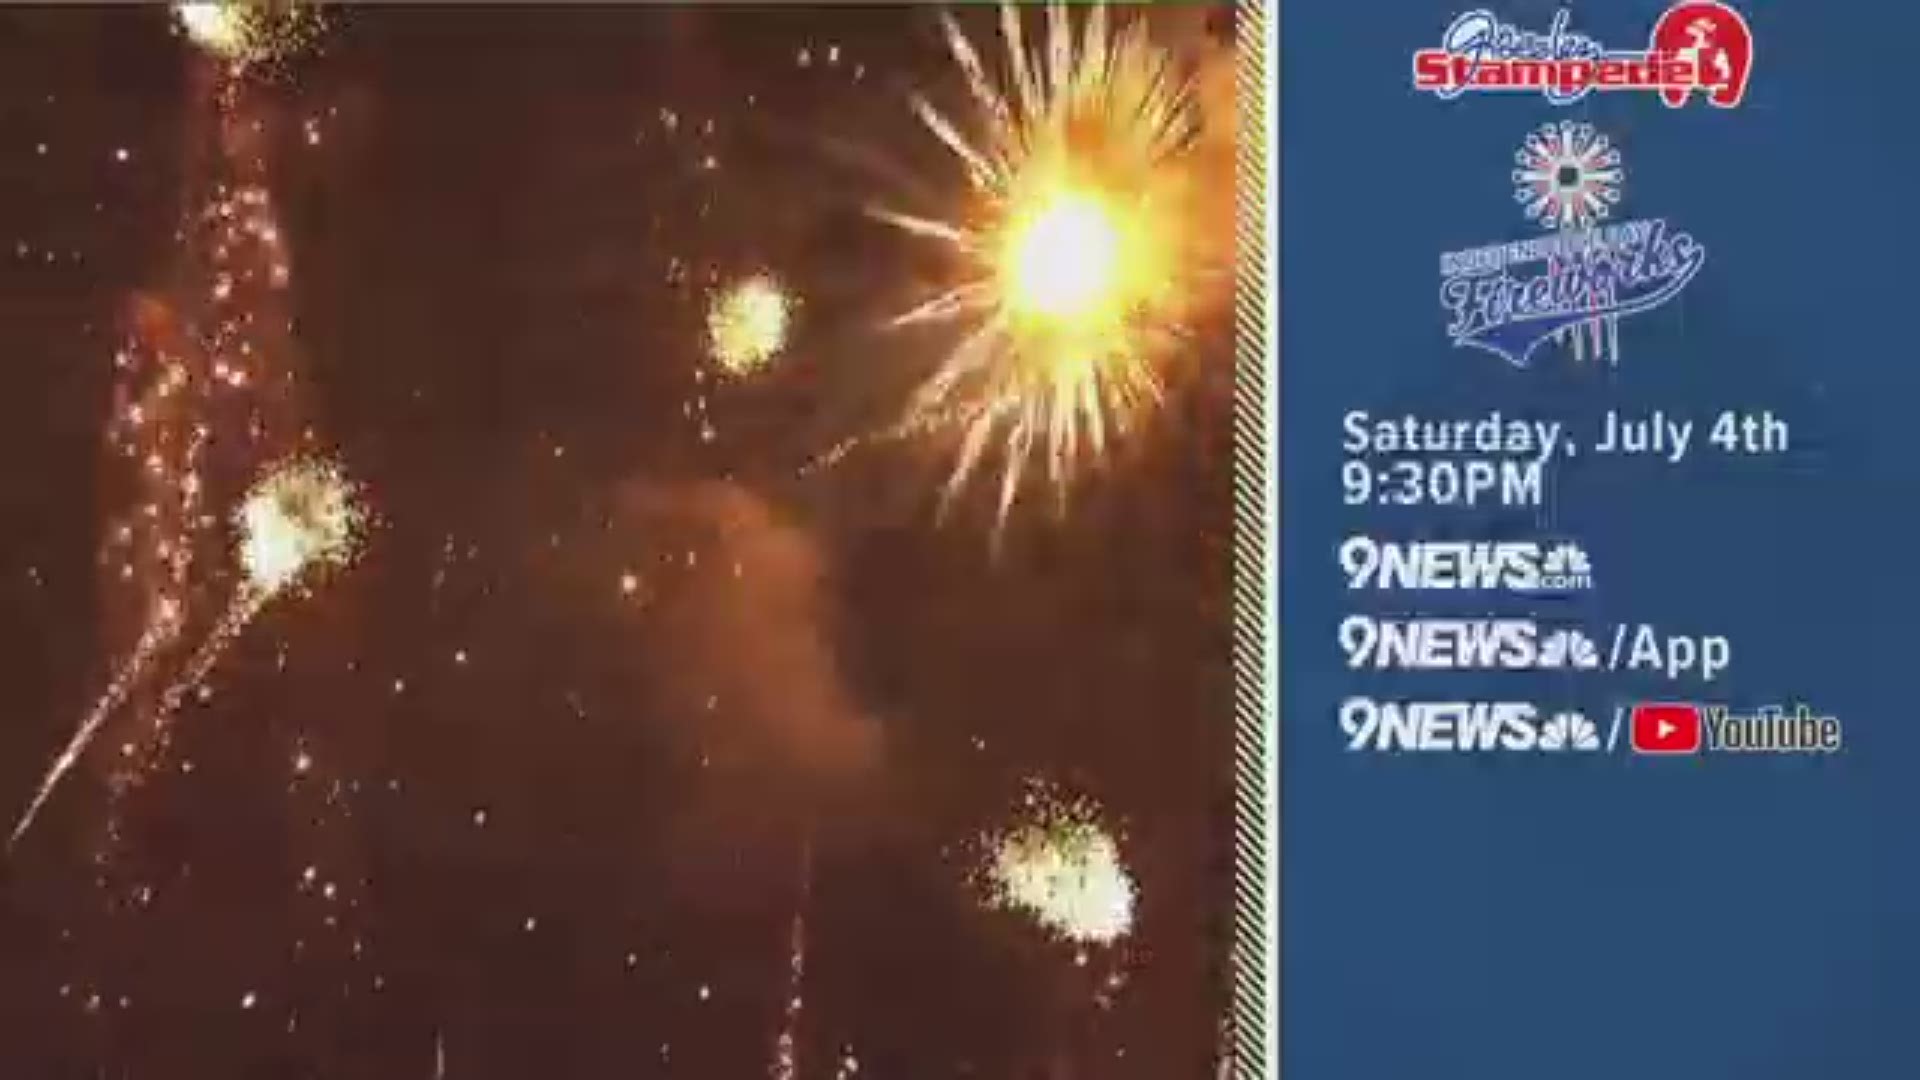 Greeley Stampede's July 4 firework display will stream on 9NEWS.com, 9NEWS social media and streaming platforms at 9:30 p.m. July 4, 2020.